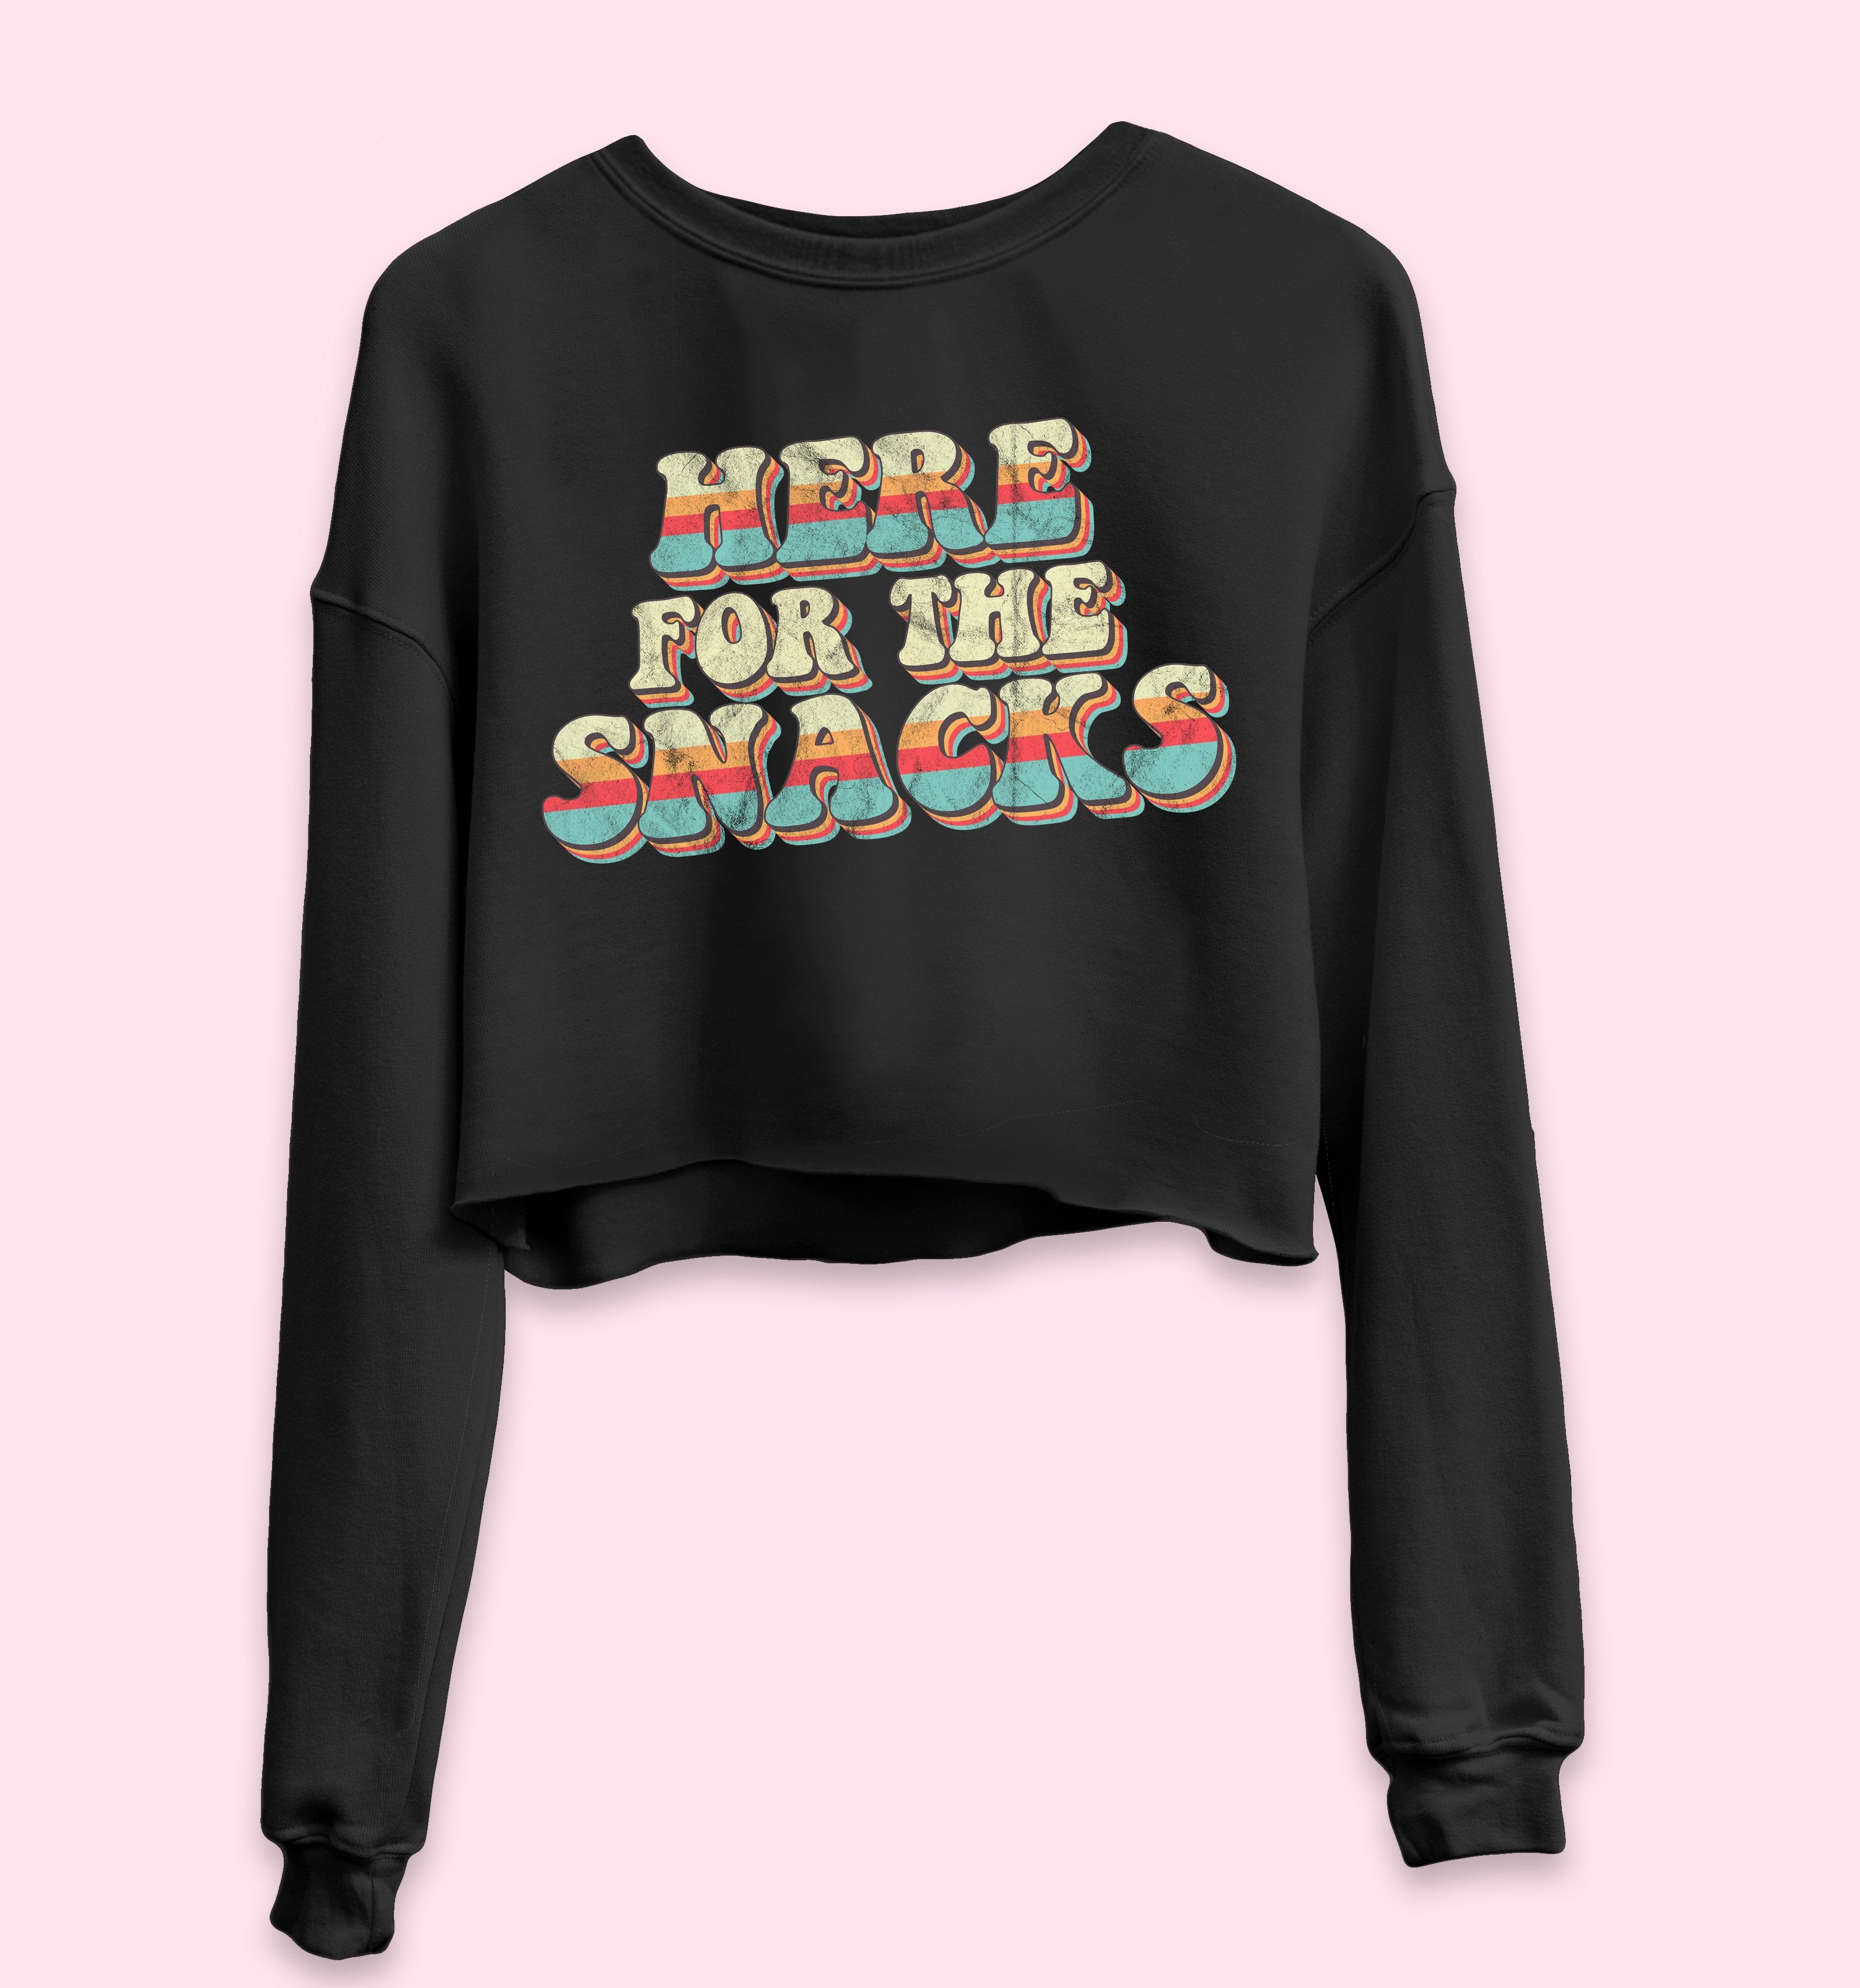 Black crop sweatshirt with colorful retro graphic that says here for the snacks - HighCiti